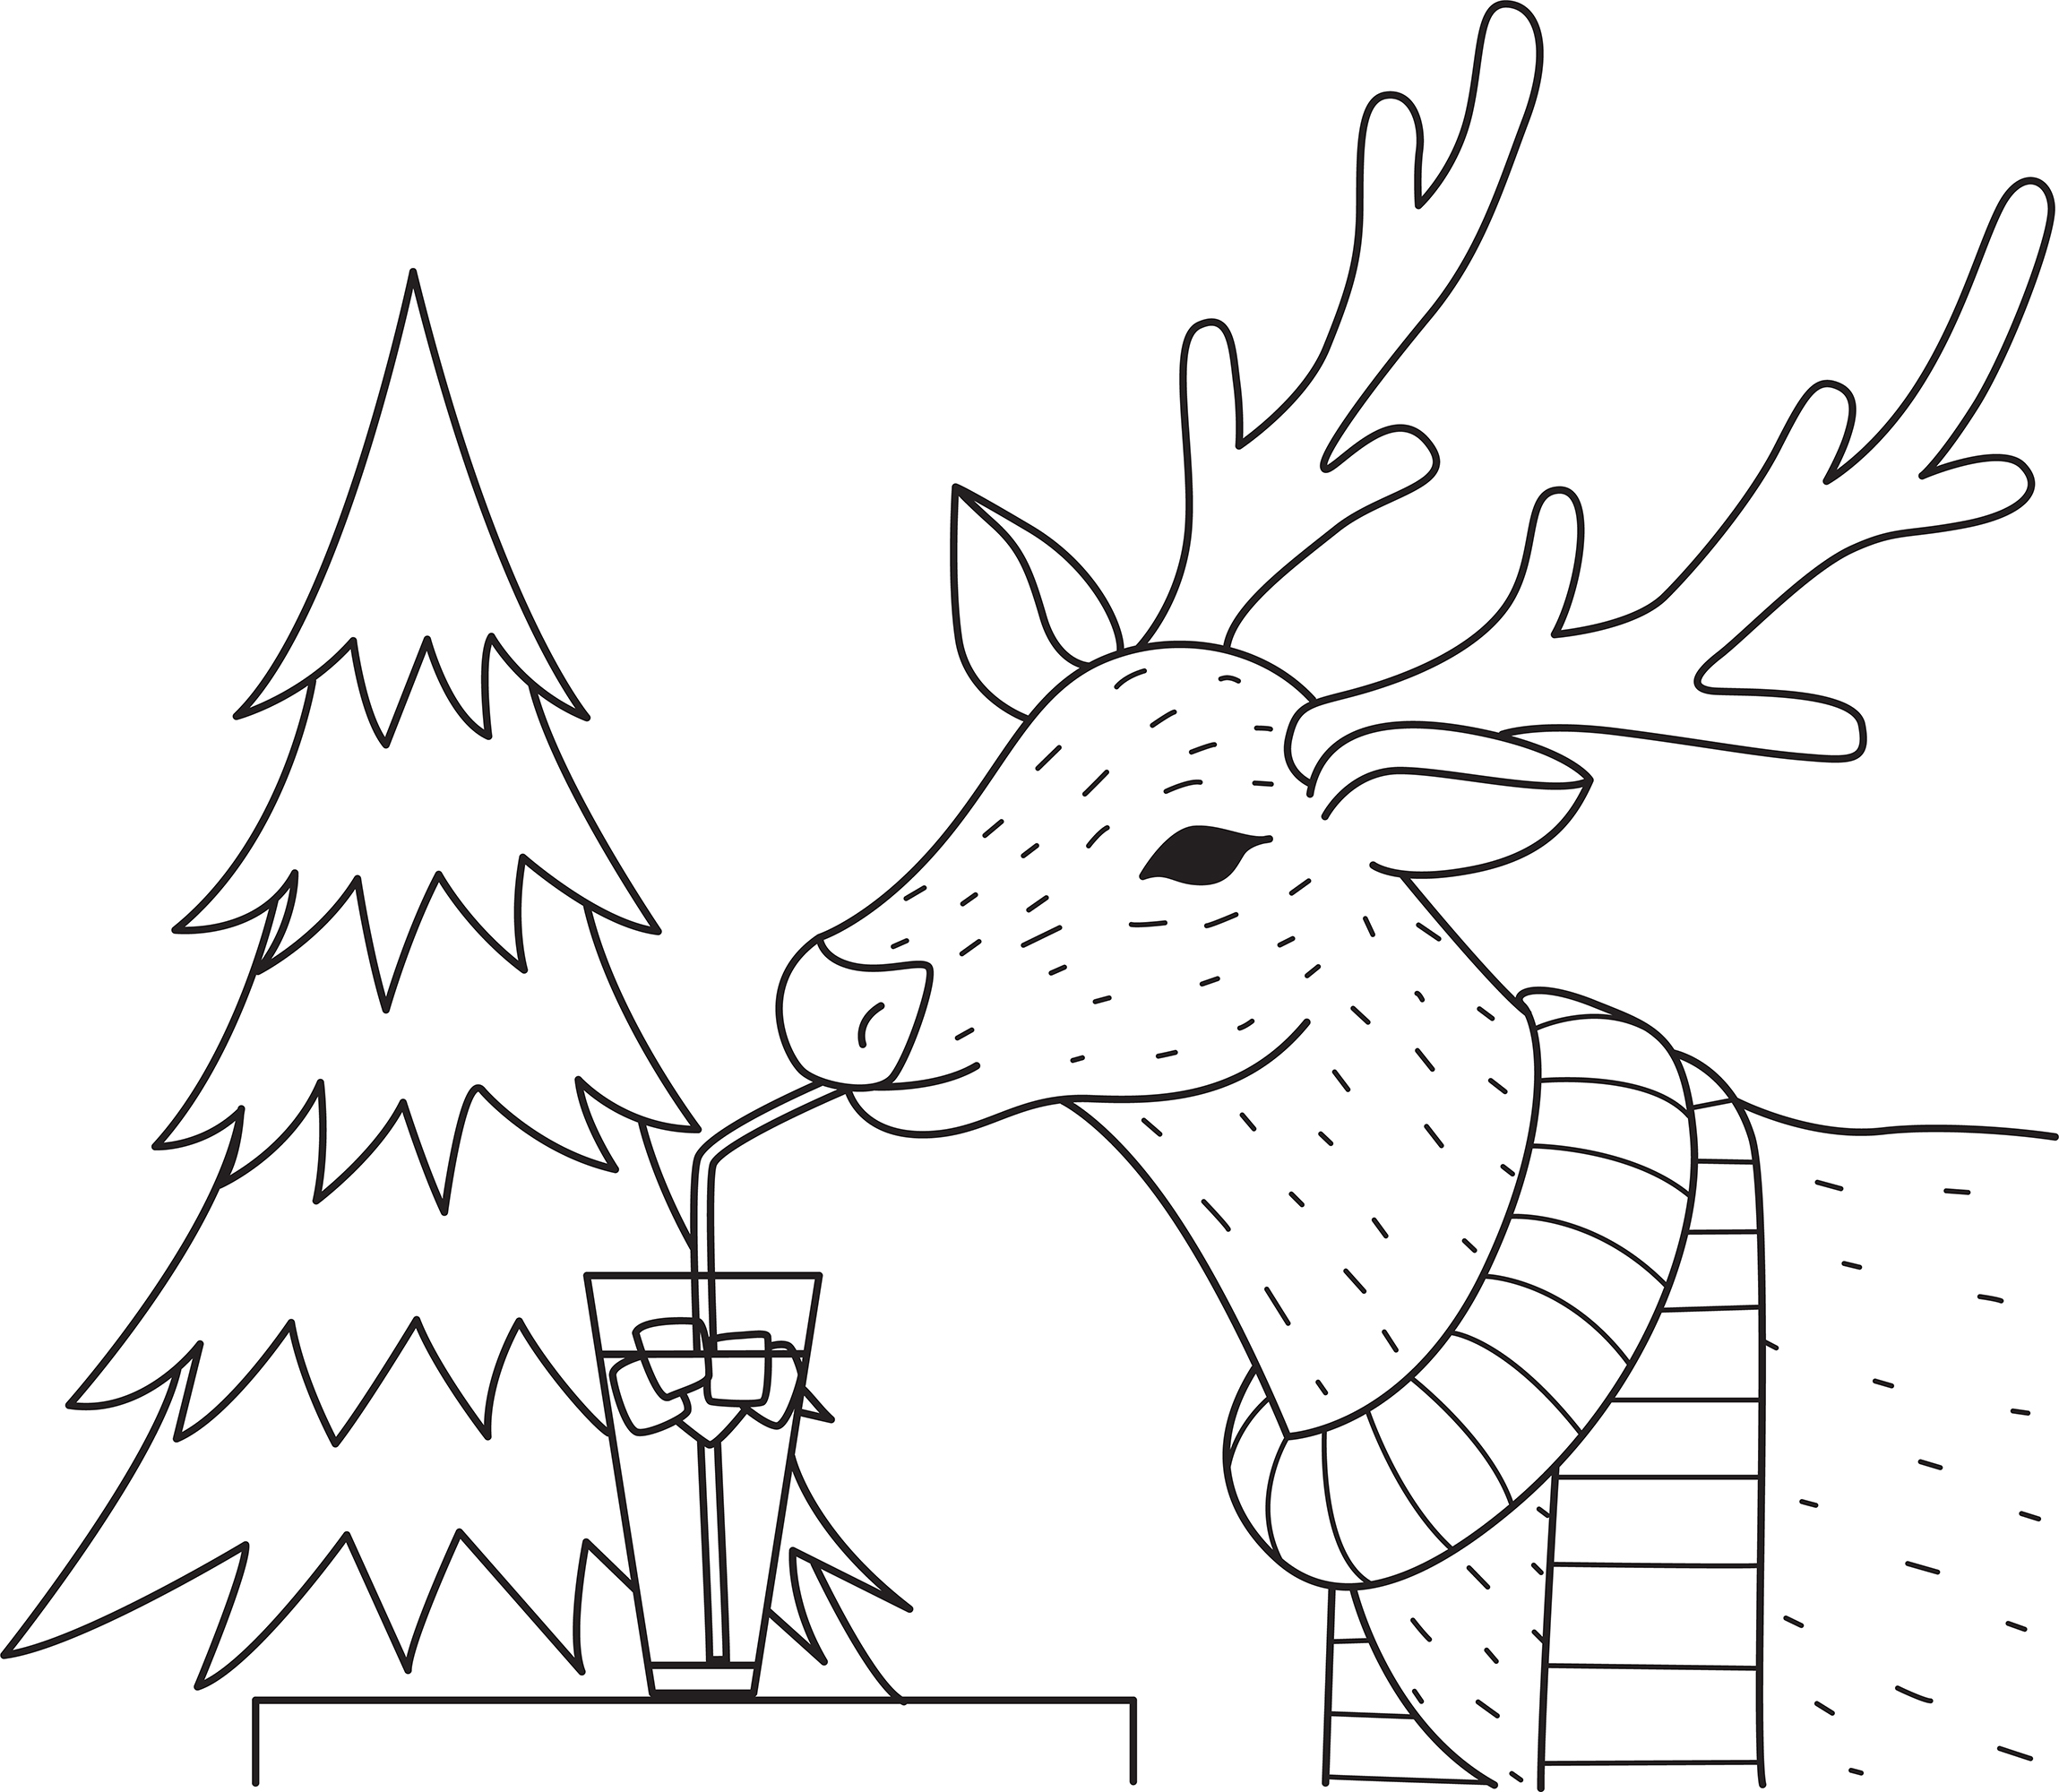 Printable reindeer coloring pages for kids add some color to that reindeer